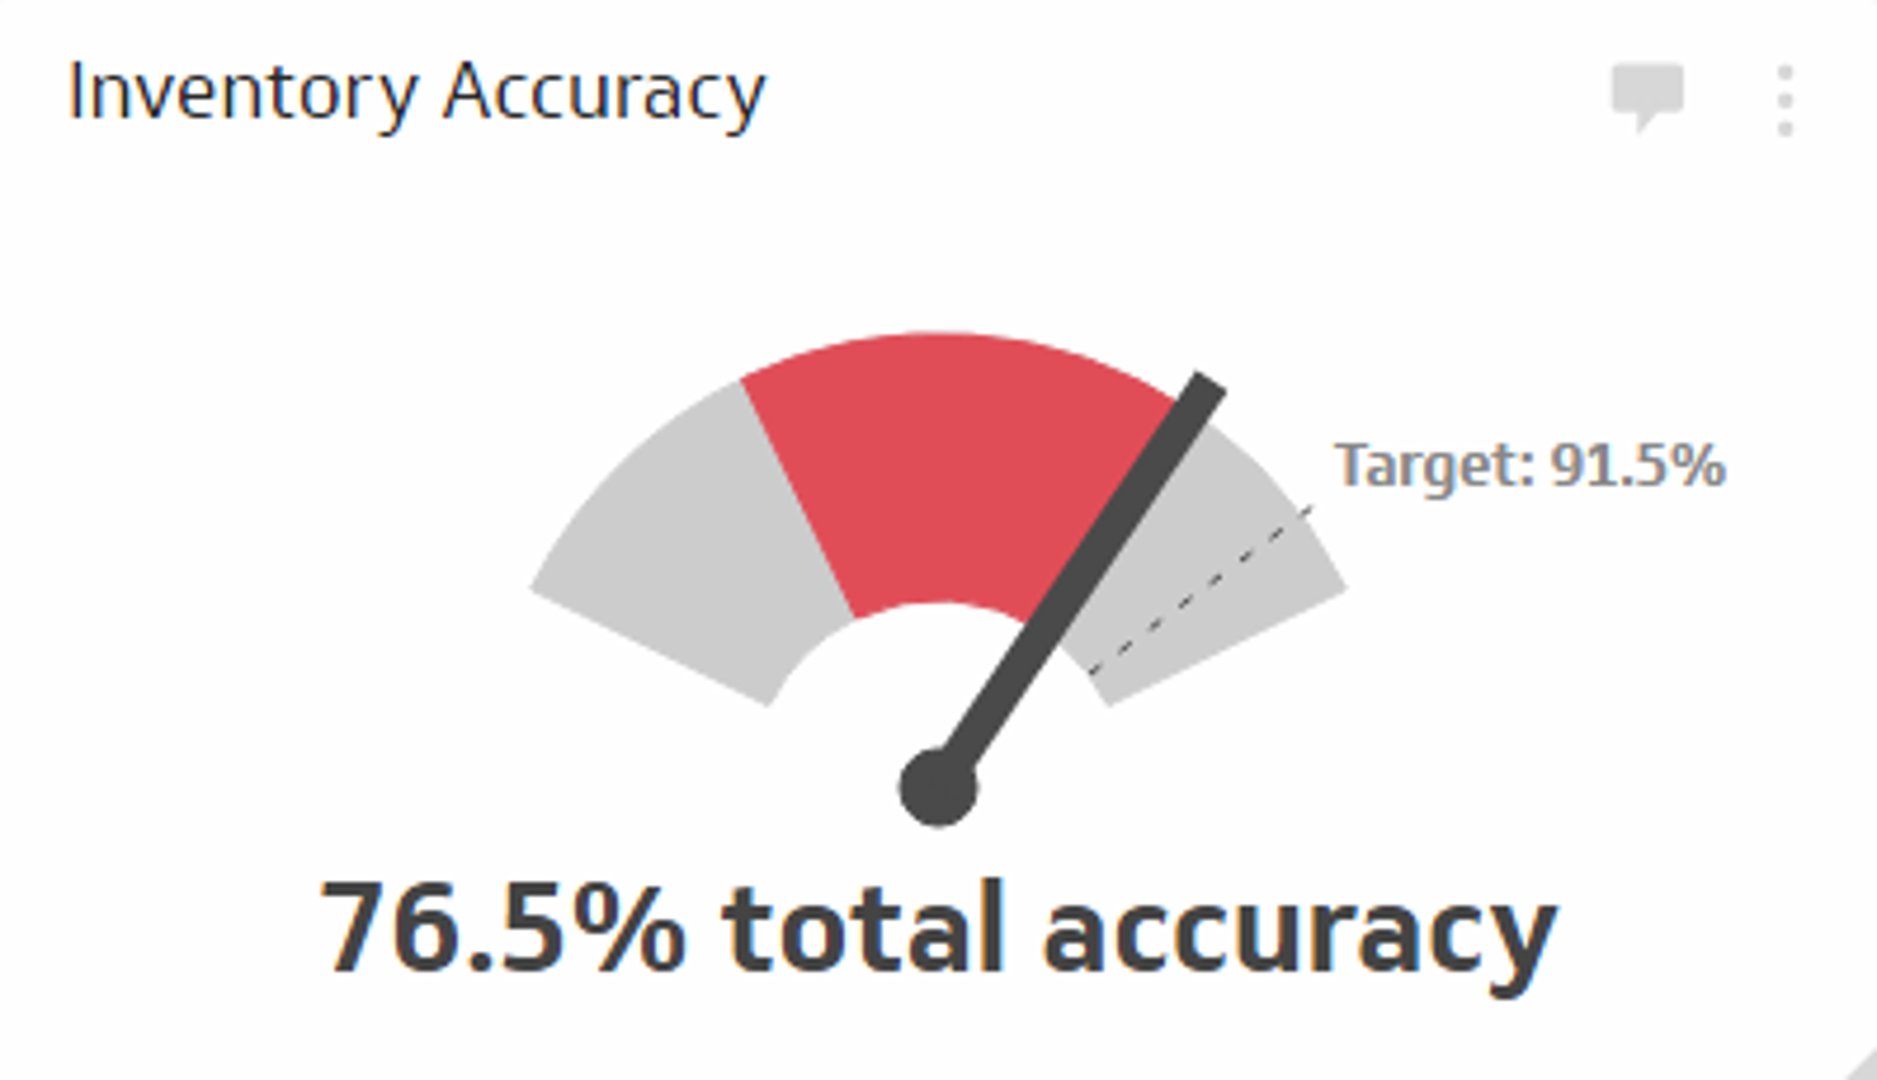 Related KPI Examples - Inventory Accuracy Metric